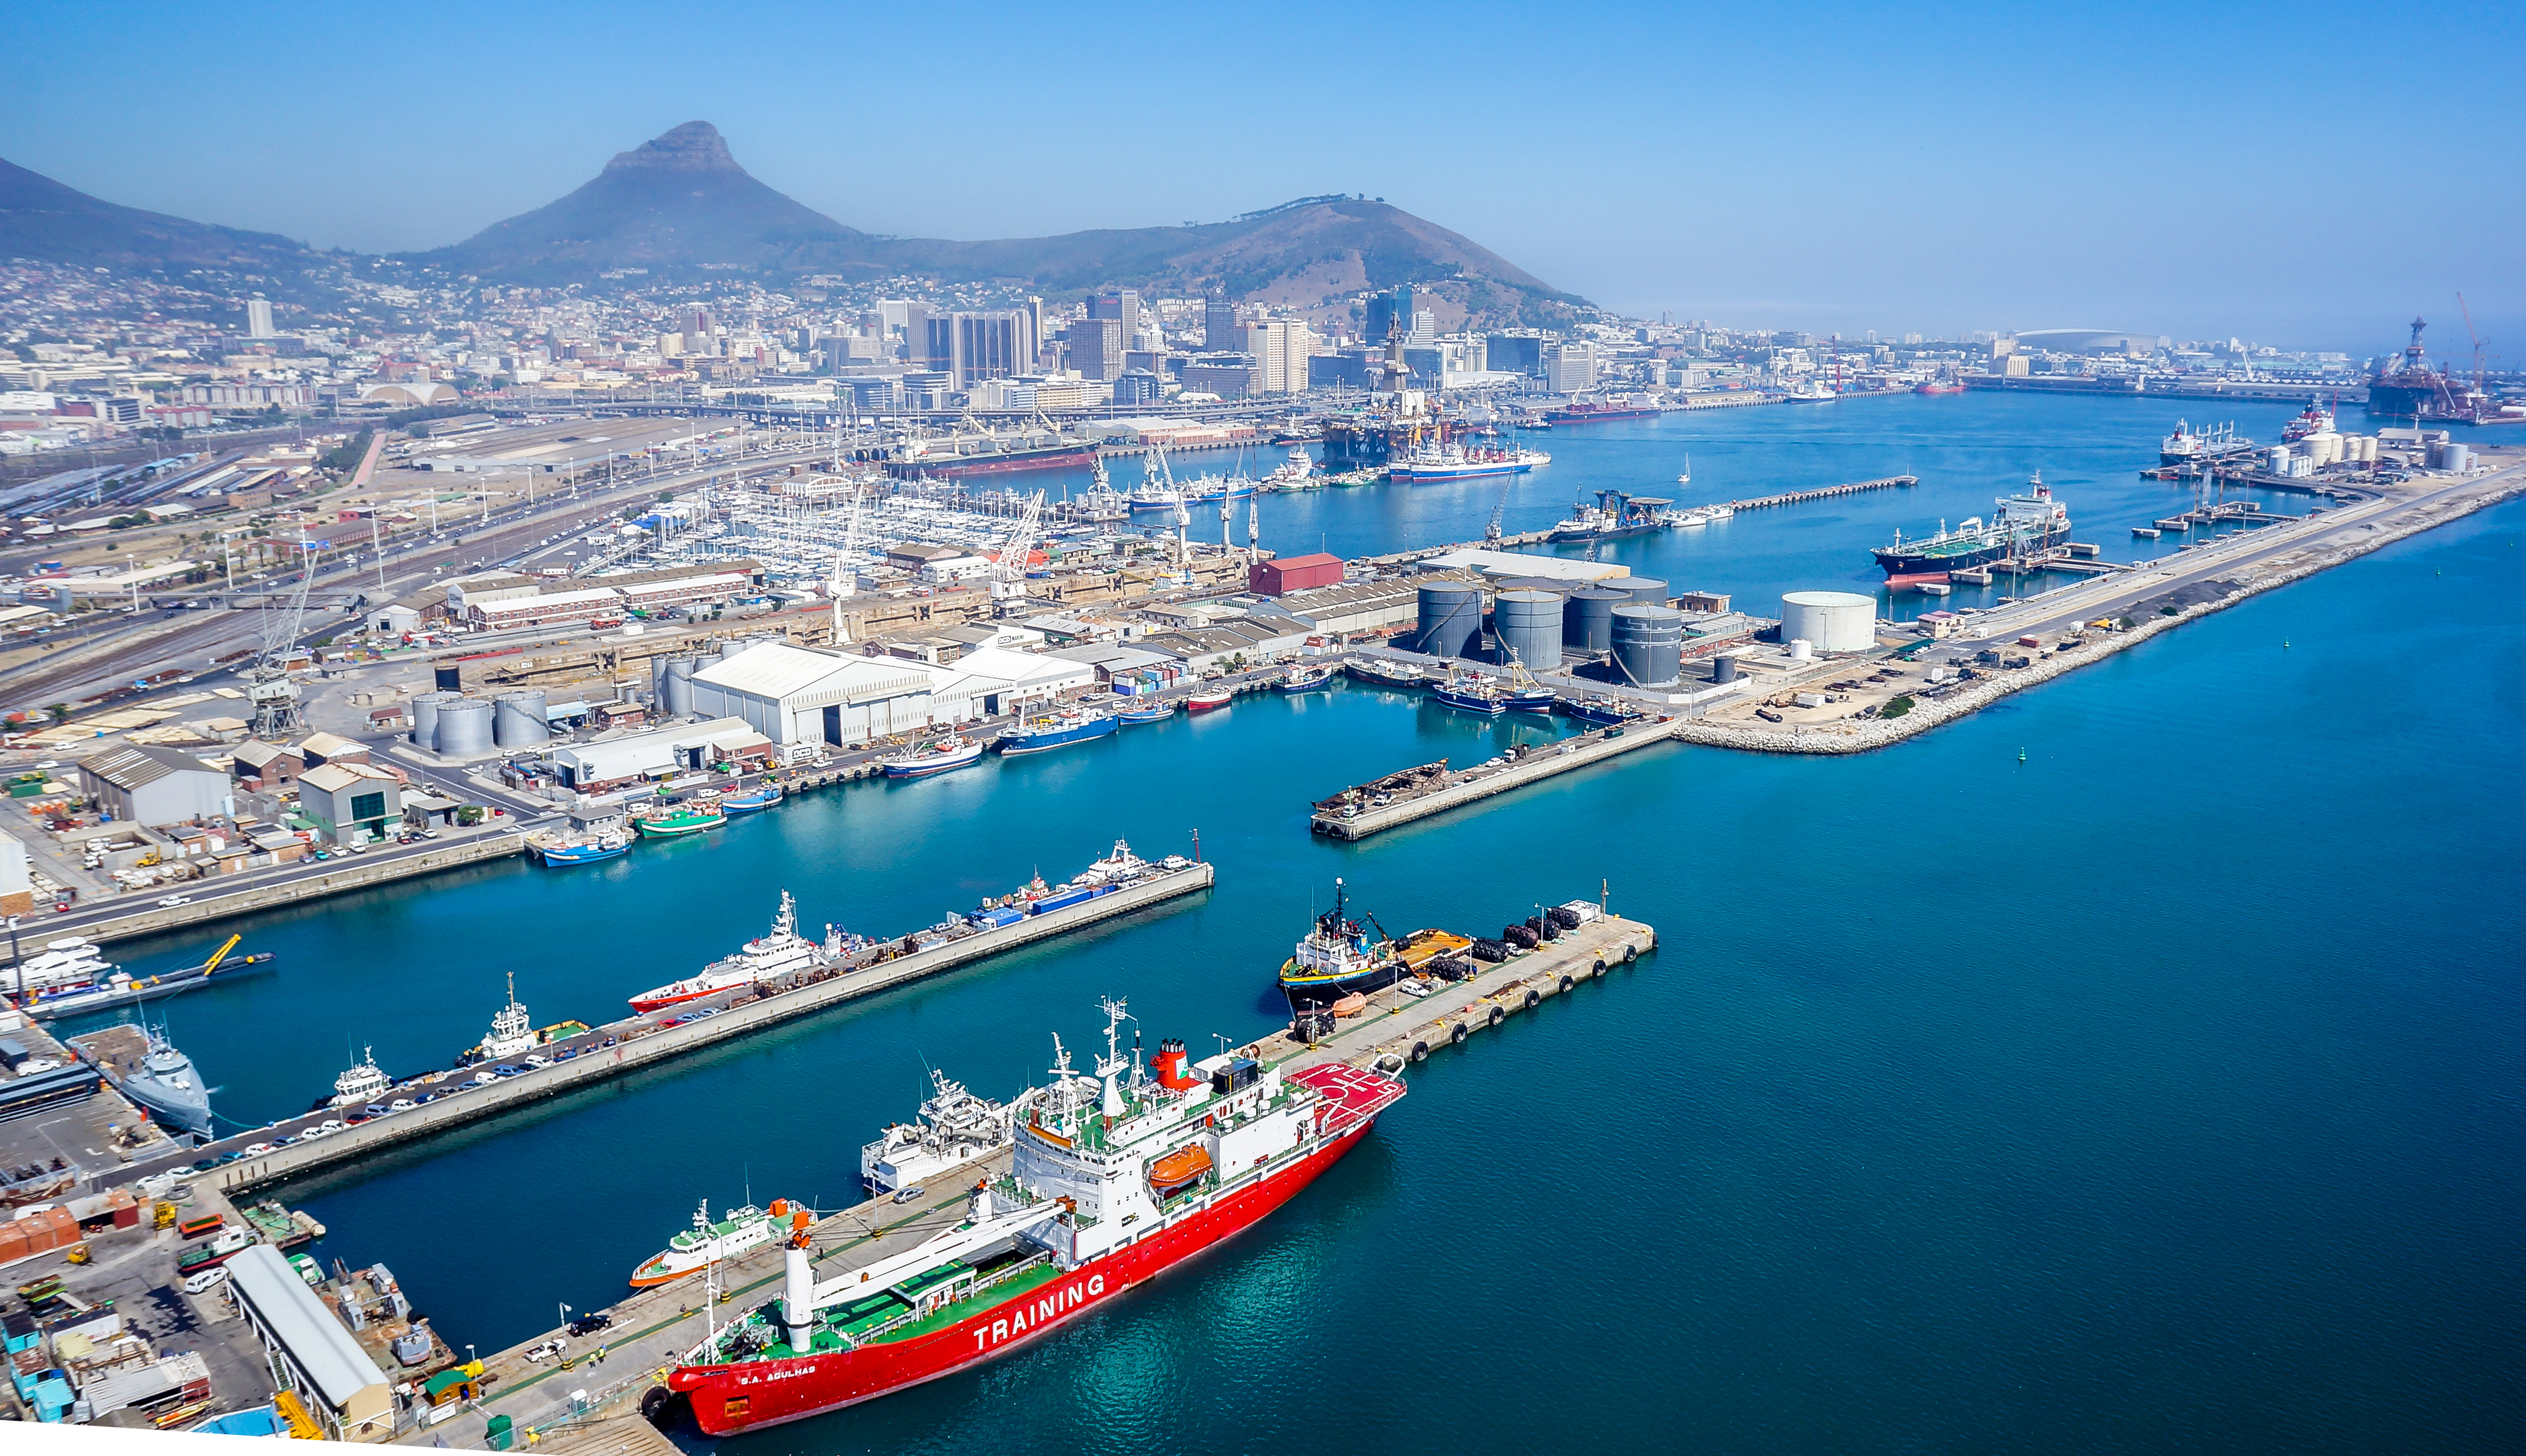 The Port of Cape Town is a major transport node in southern Africa. In addition to moving freight it also serves as a major repair site for ships and oil rigs. Photo taken on March 4, 2014.